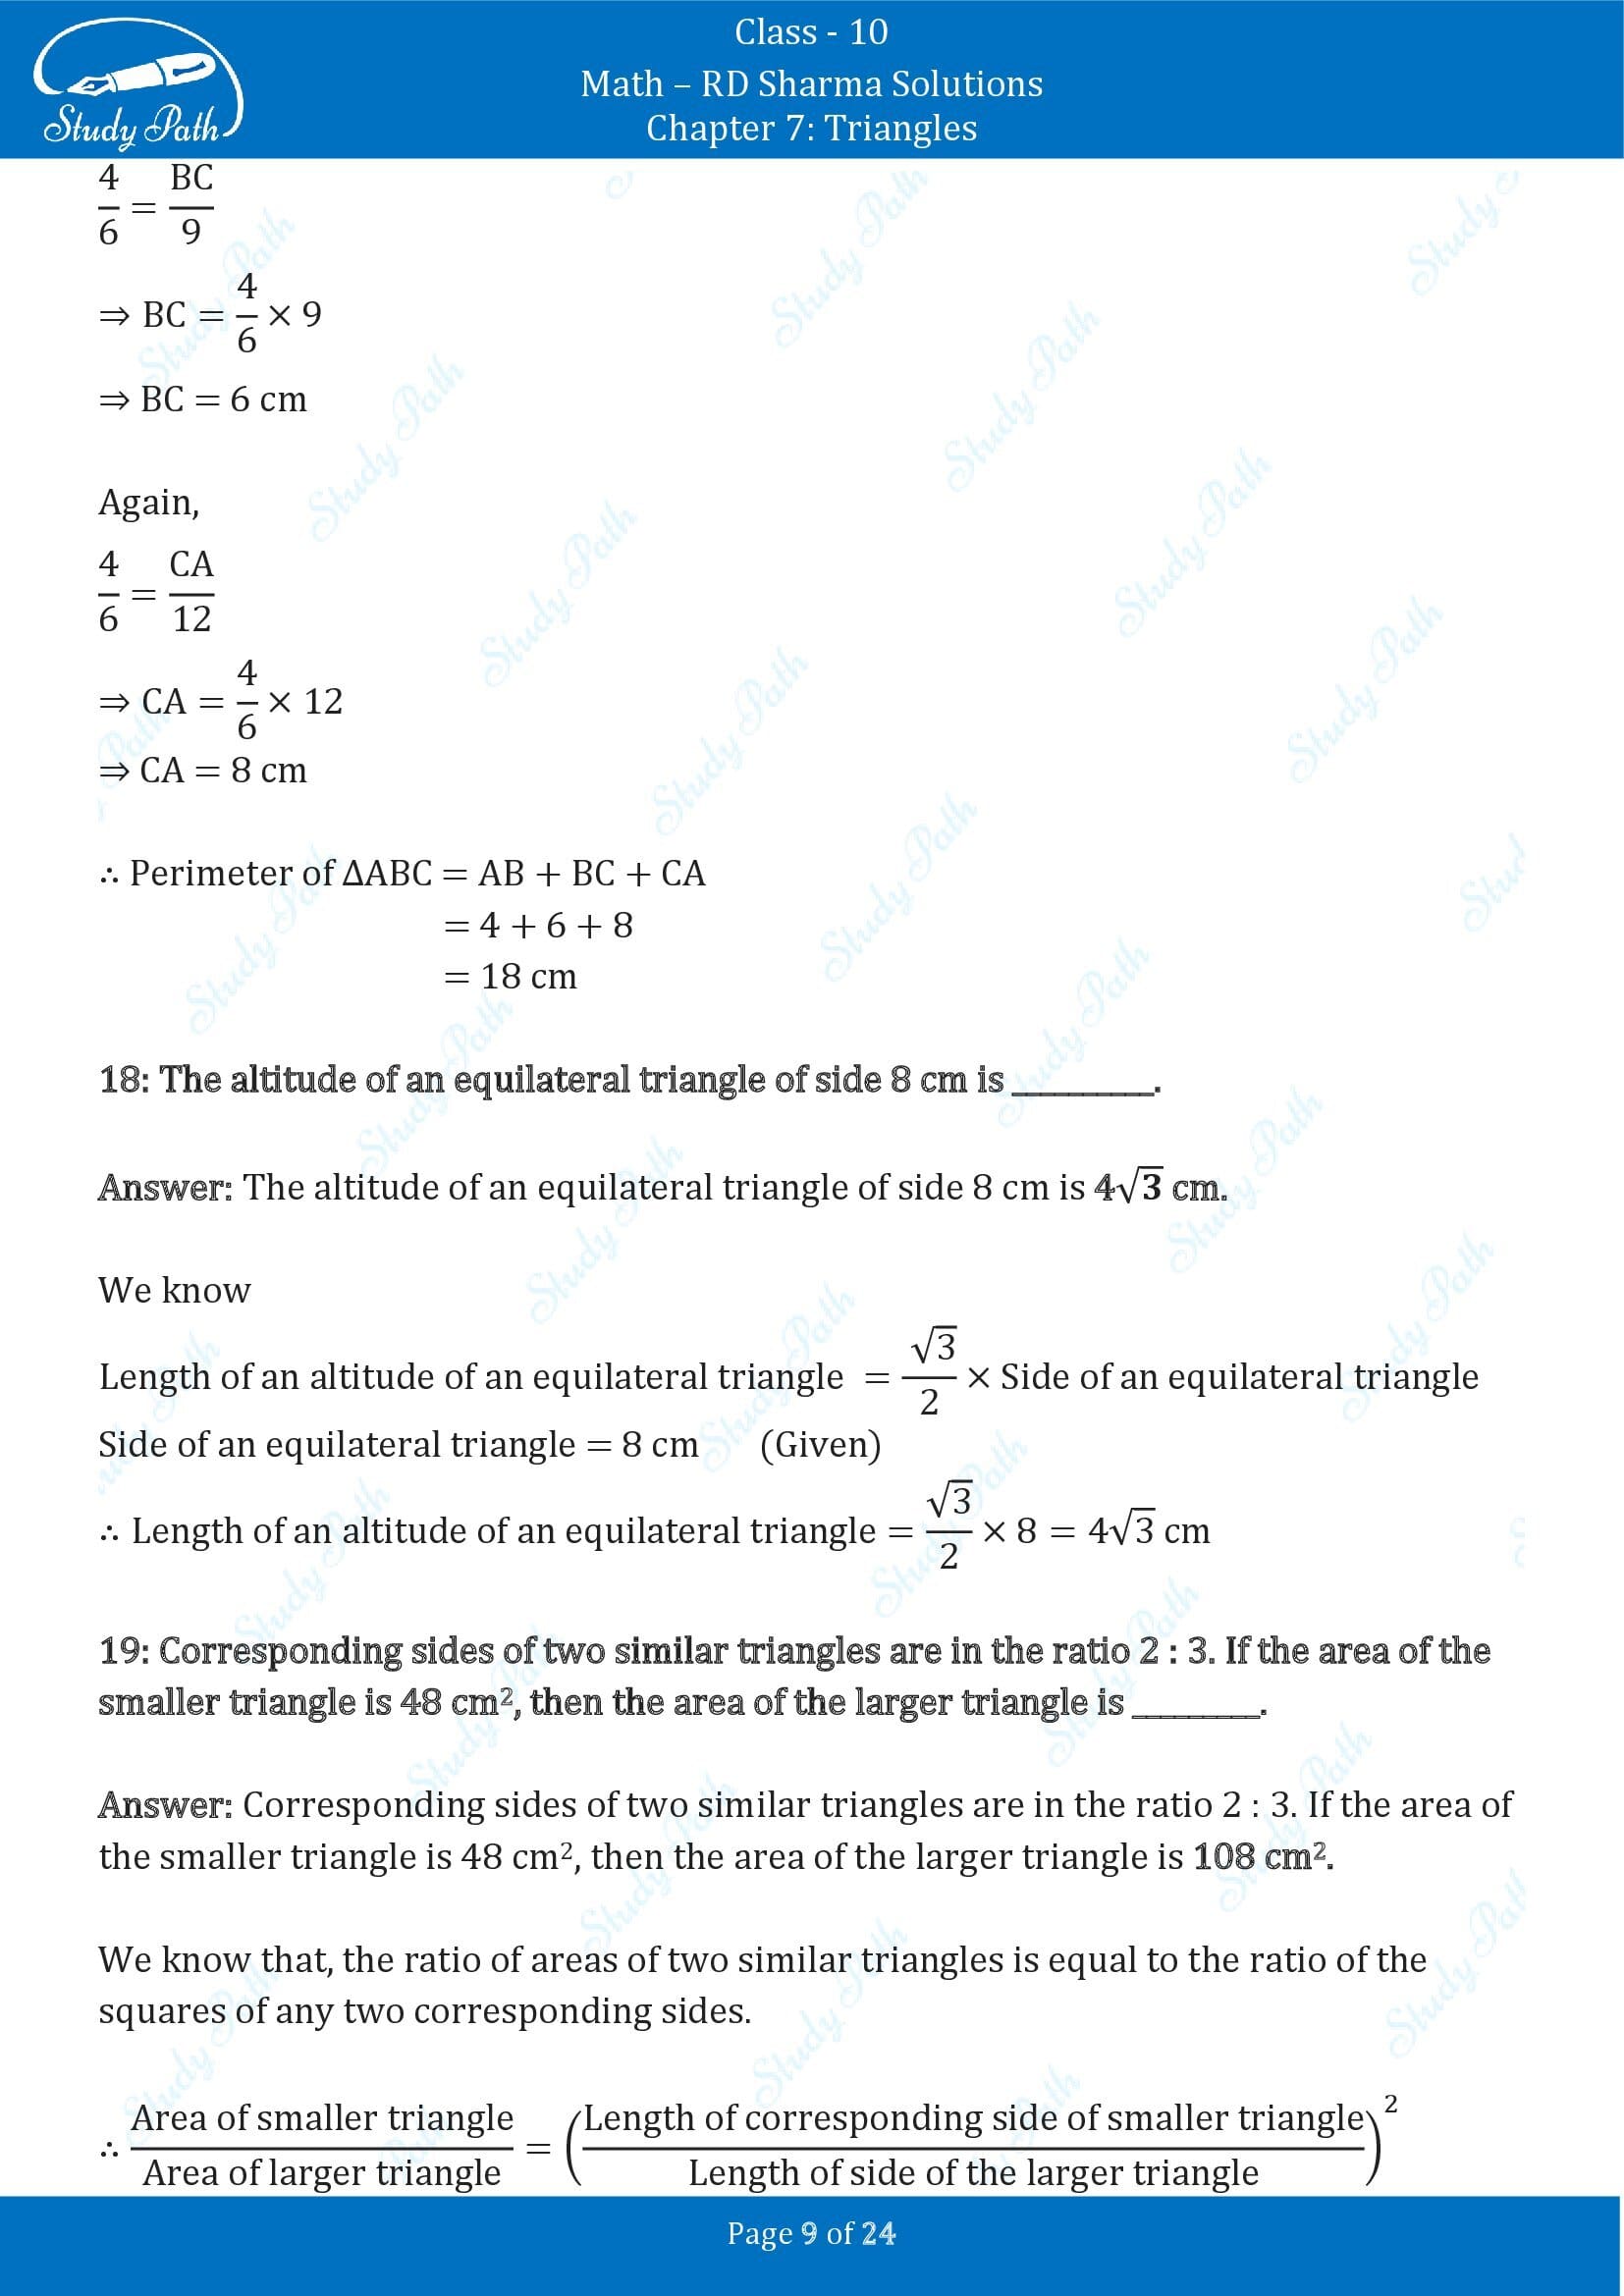 RD Sharma Solutions Class 10 Chapter 7 Triangles Fill in the Blank Type Questions FBQs 00009